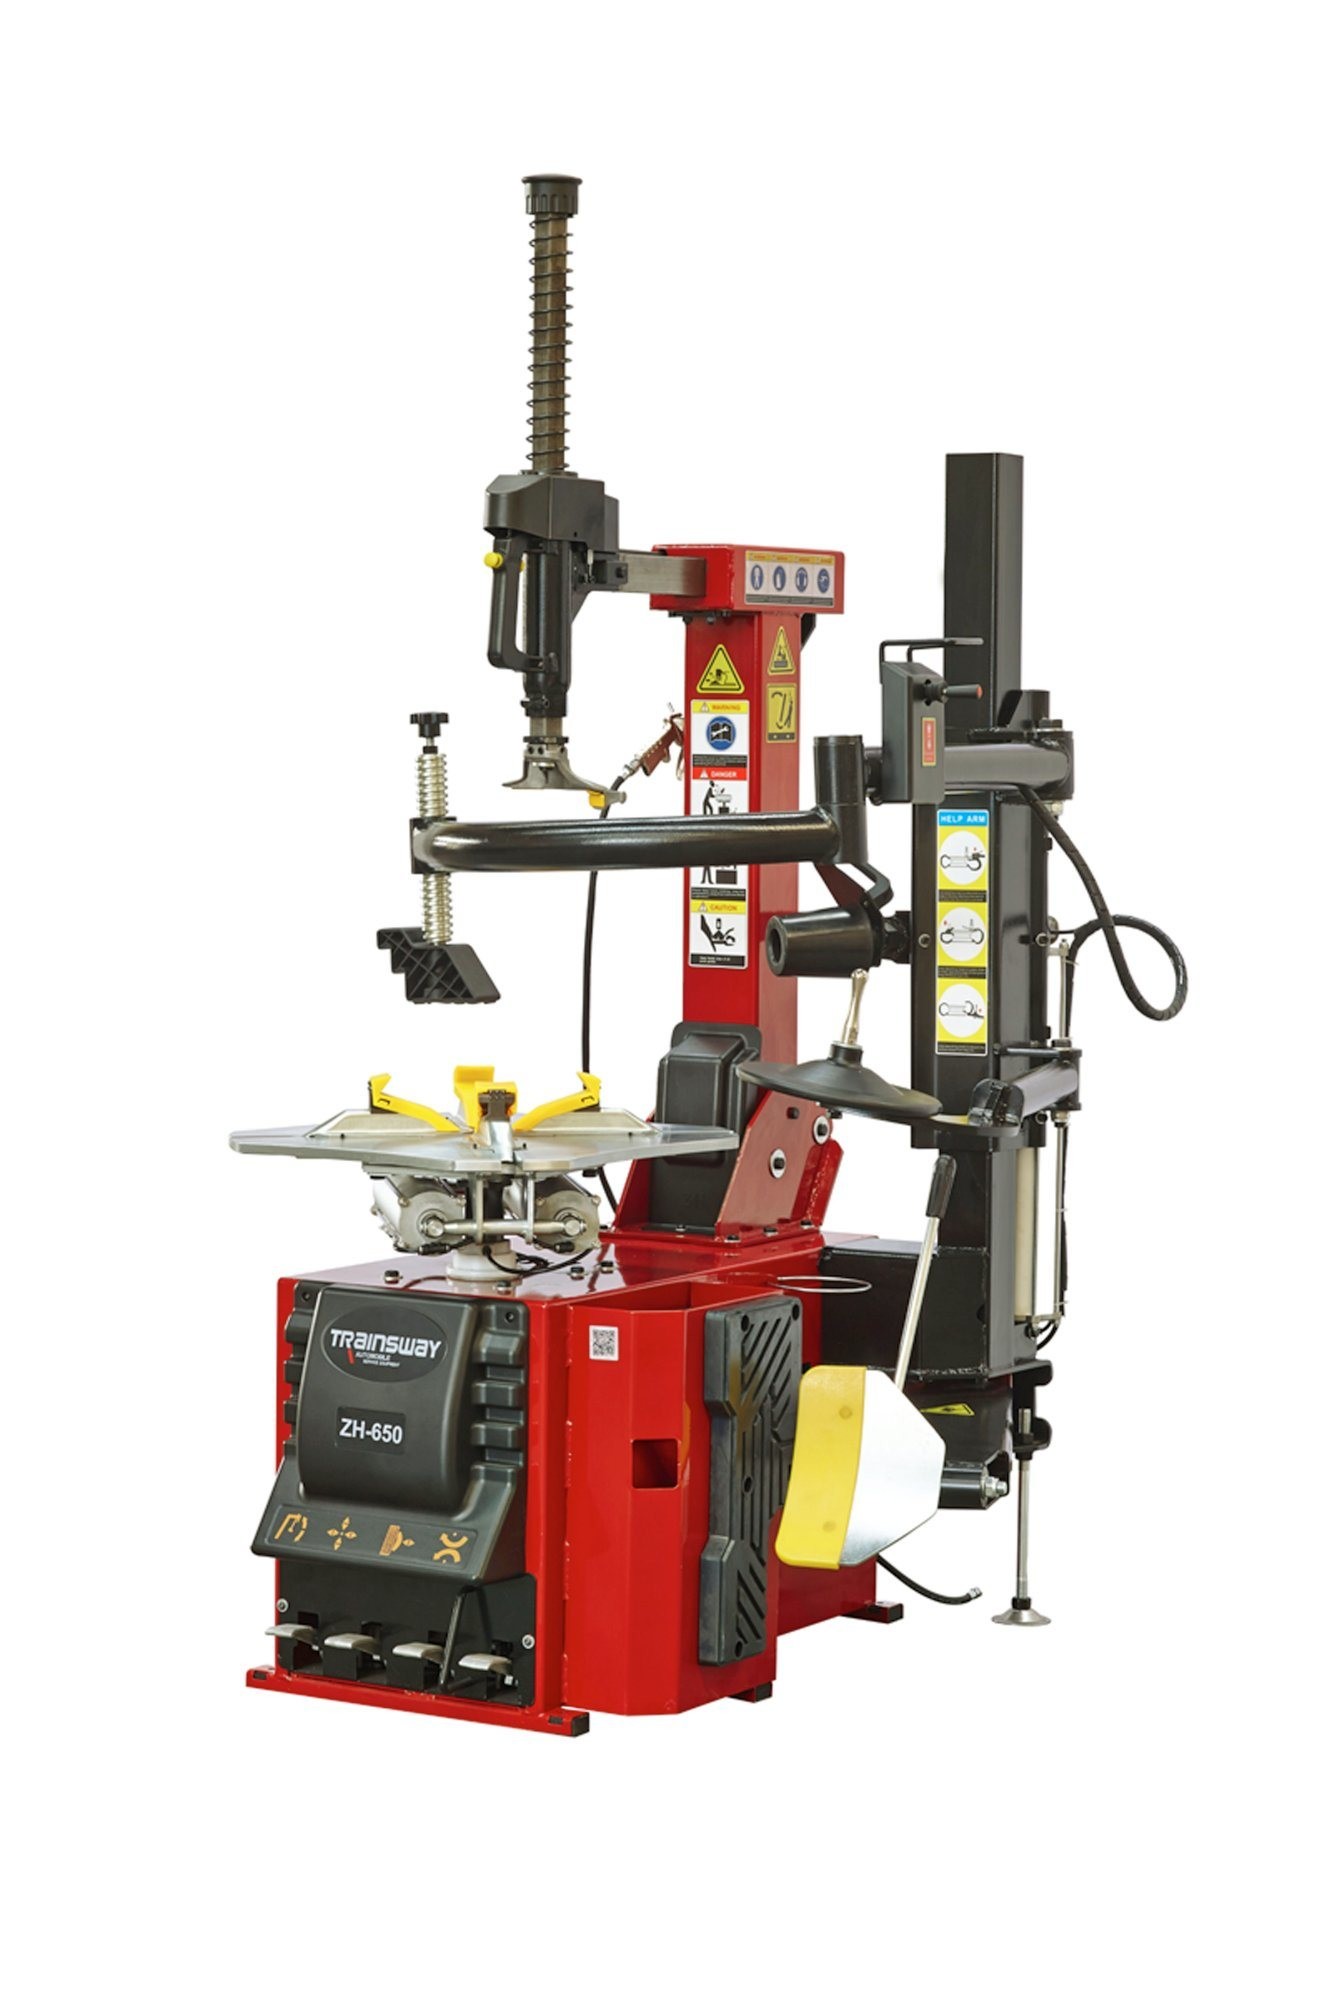 China Trainsway Zh650ra Tire Equipment Tire Machine with After-sales Service Supported factory